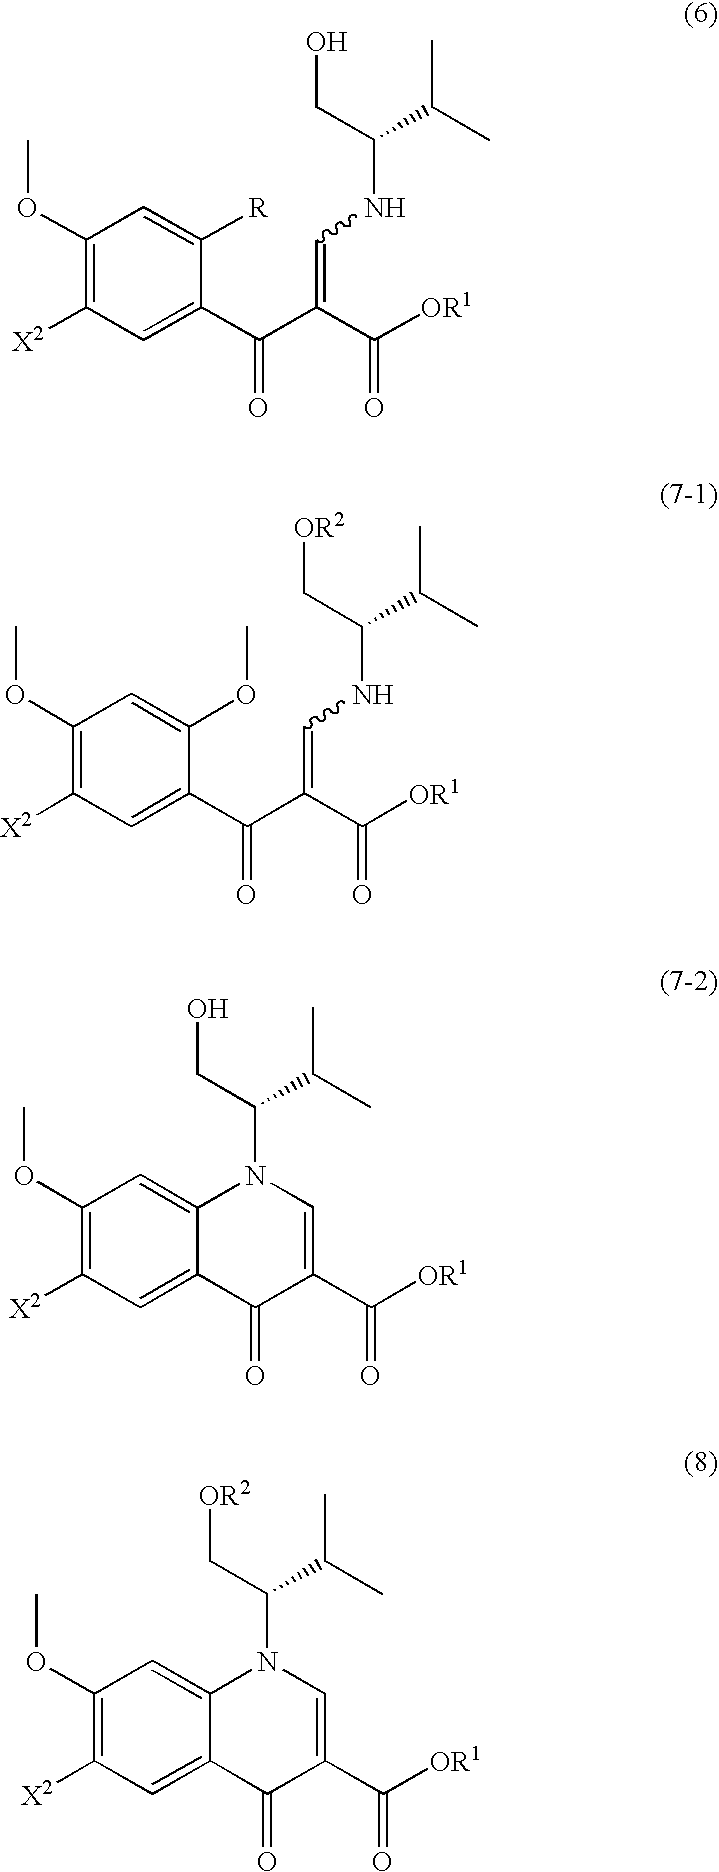 Process for production of 4-oxoquinoline compound